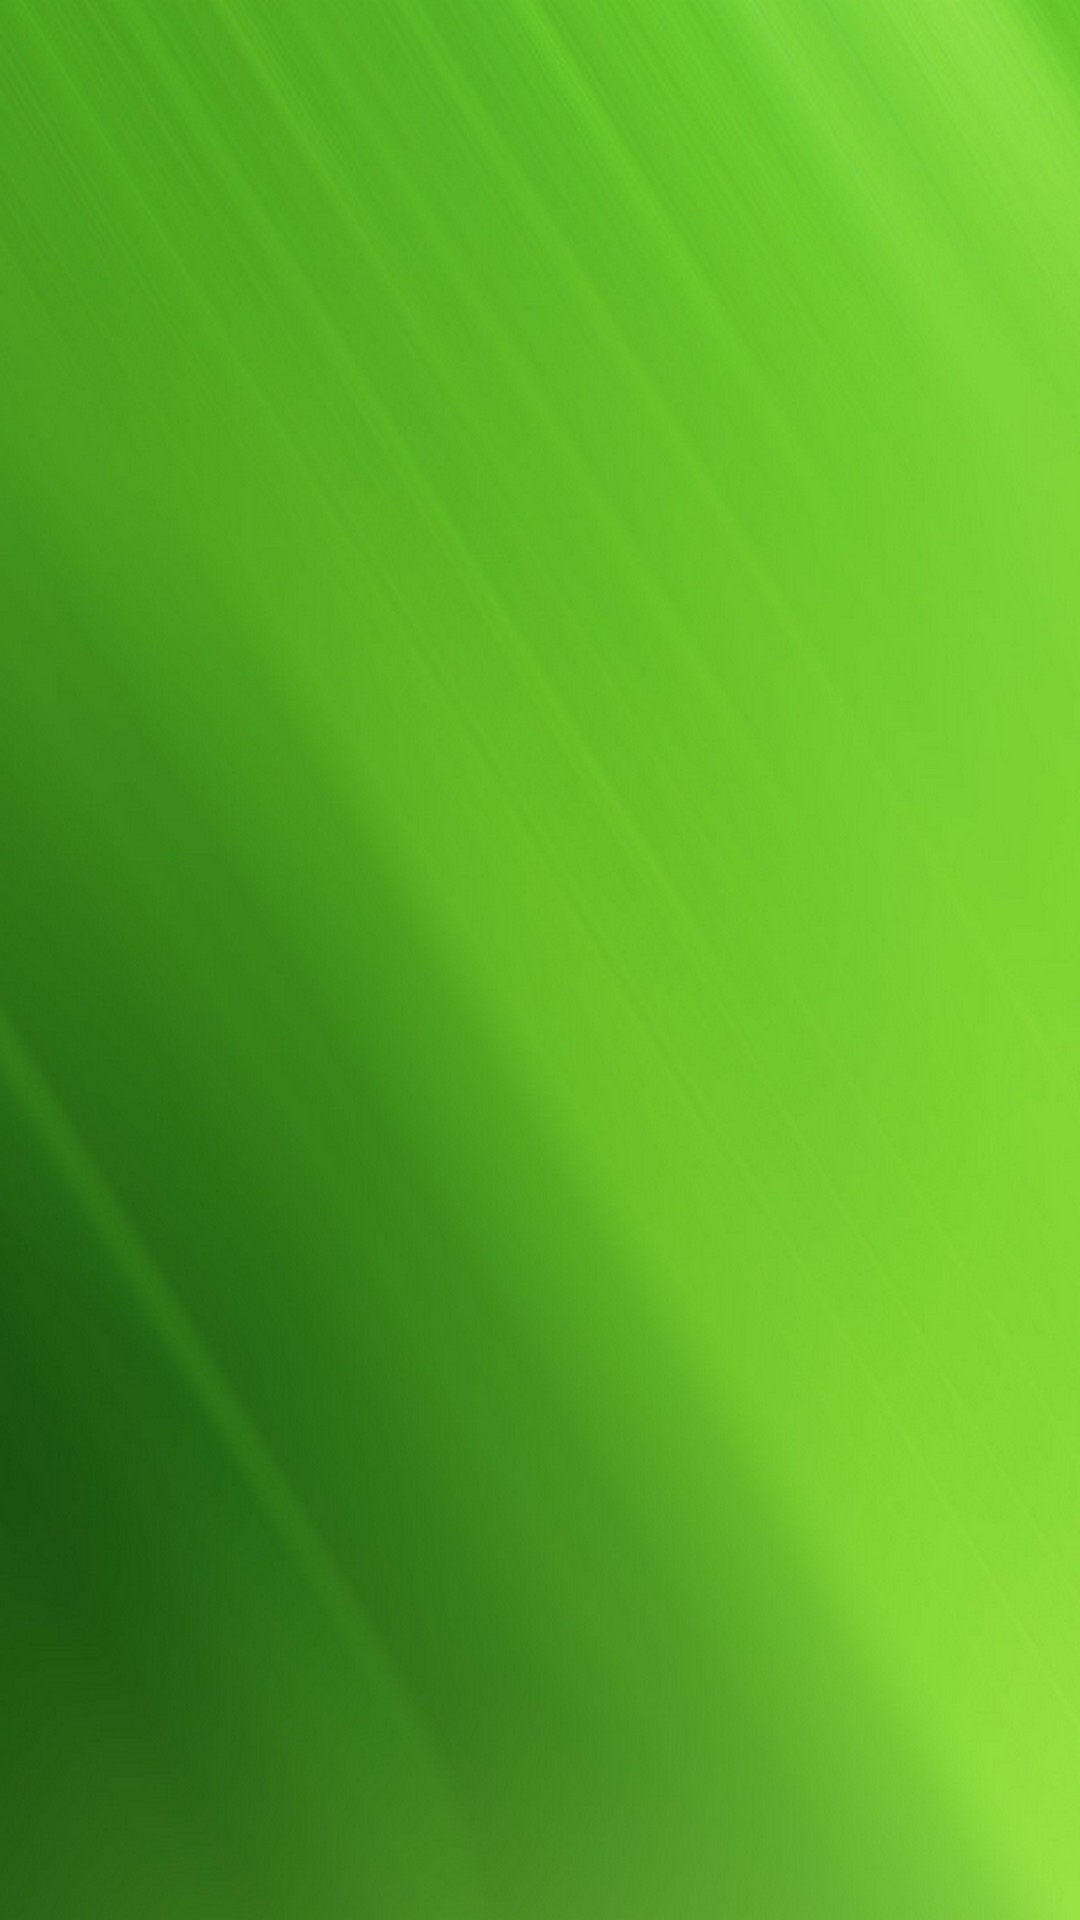 Green Wallpaper For iPhone with image resolution 1080x1920 pixel. You can make this wallpaper for your iPhone 5, 6, 7, 8, X backgrounds, Mobile Screensaver, or iPad Lock Screen